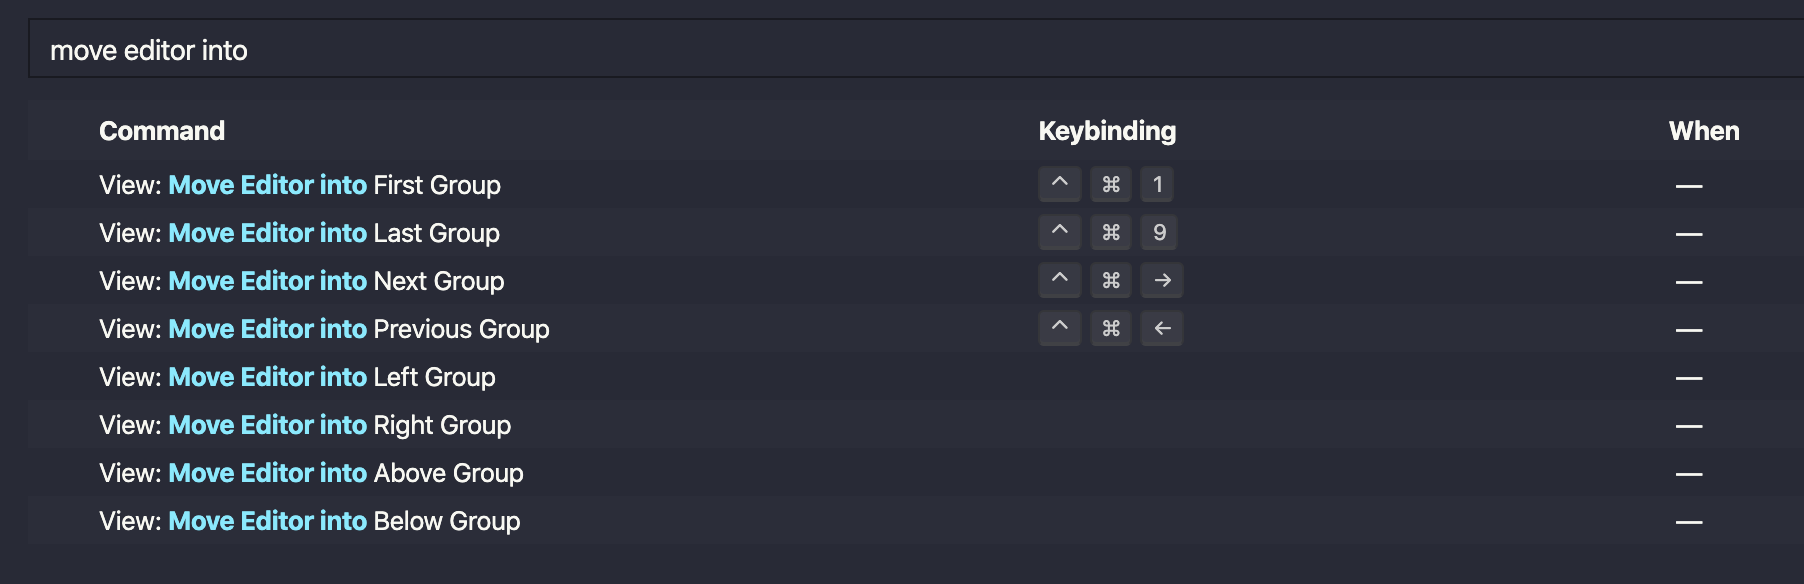 Searched for Move editor into in the keyboarh shortcuts panel.